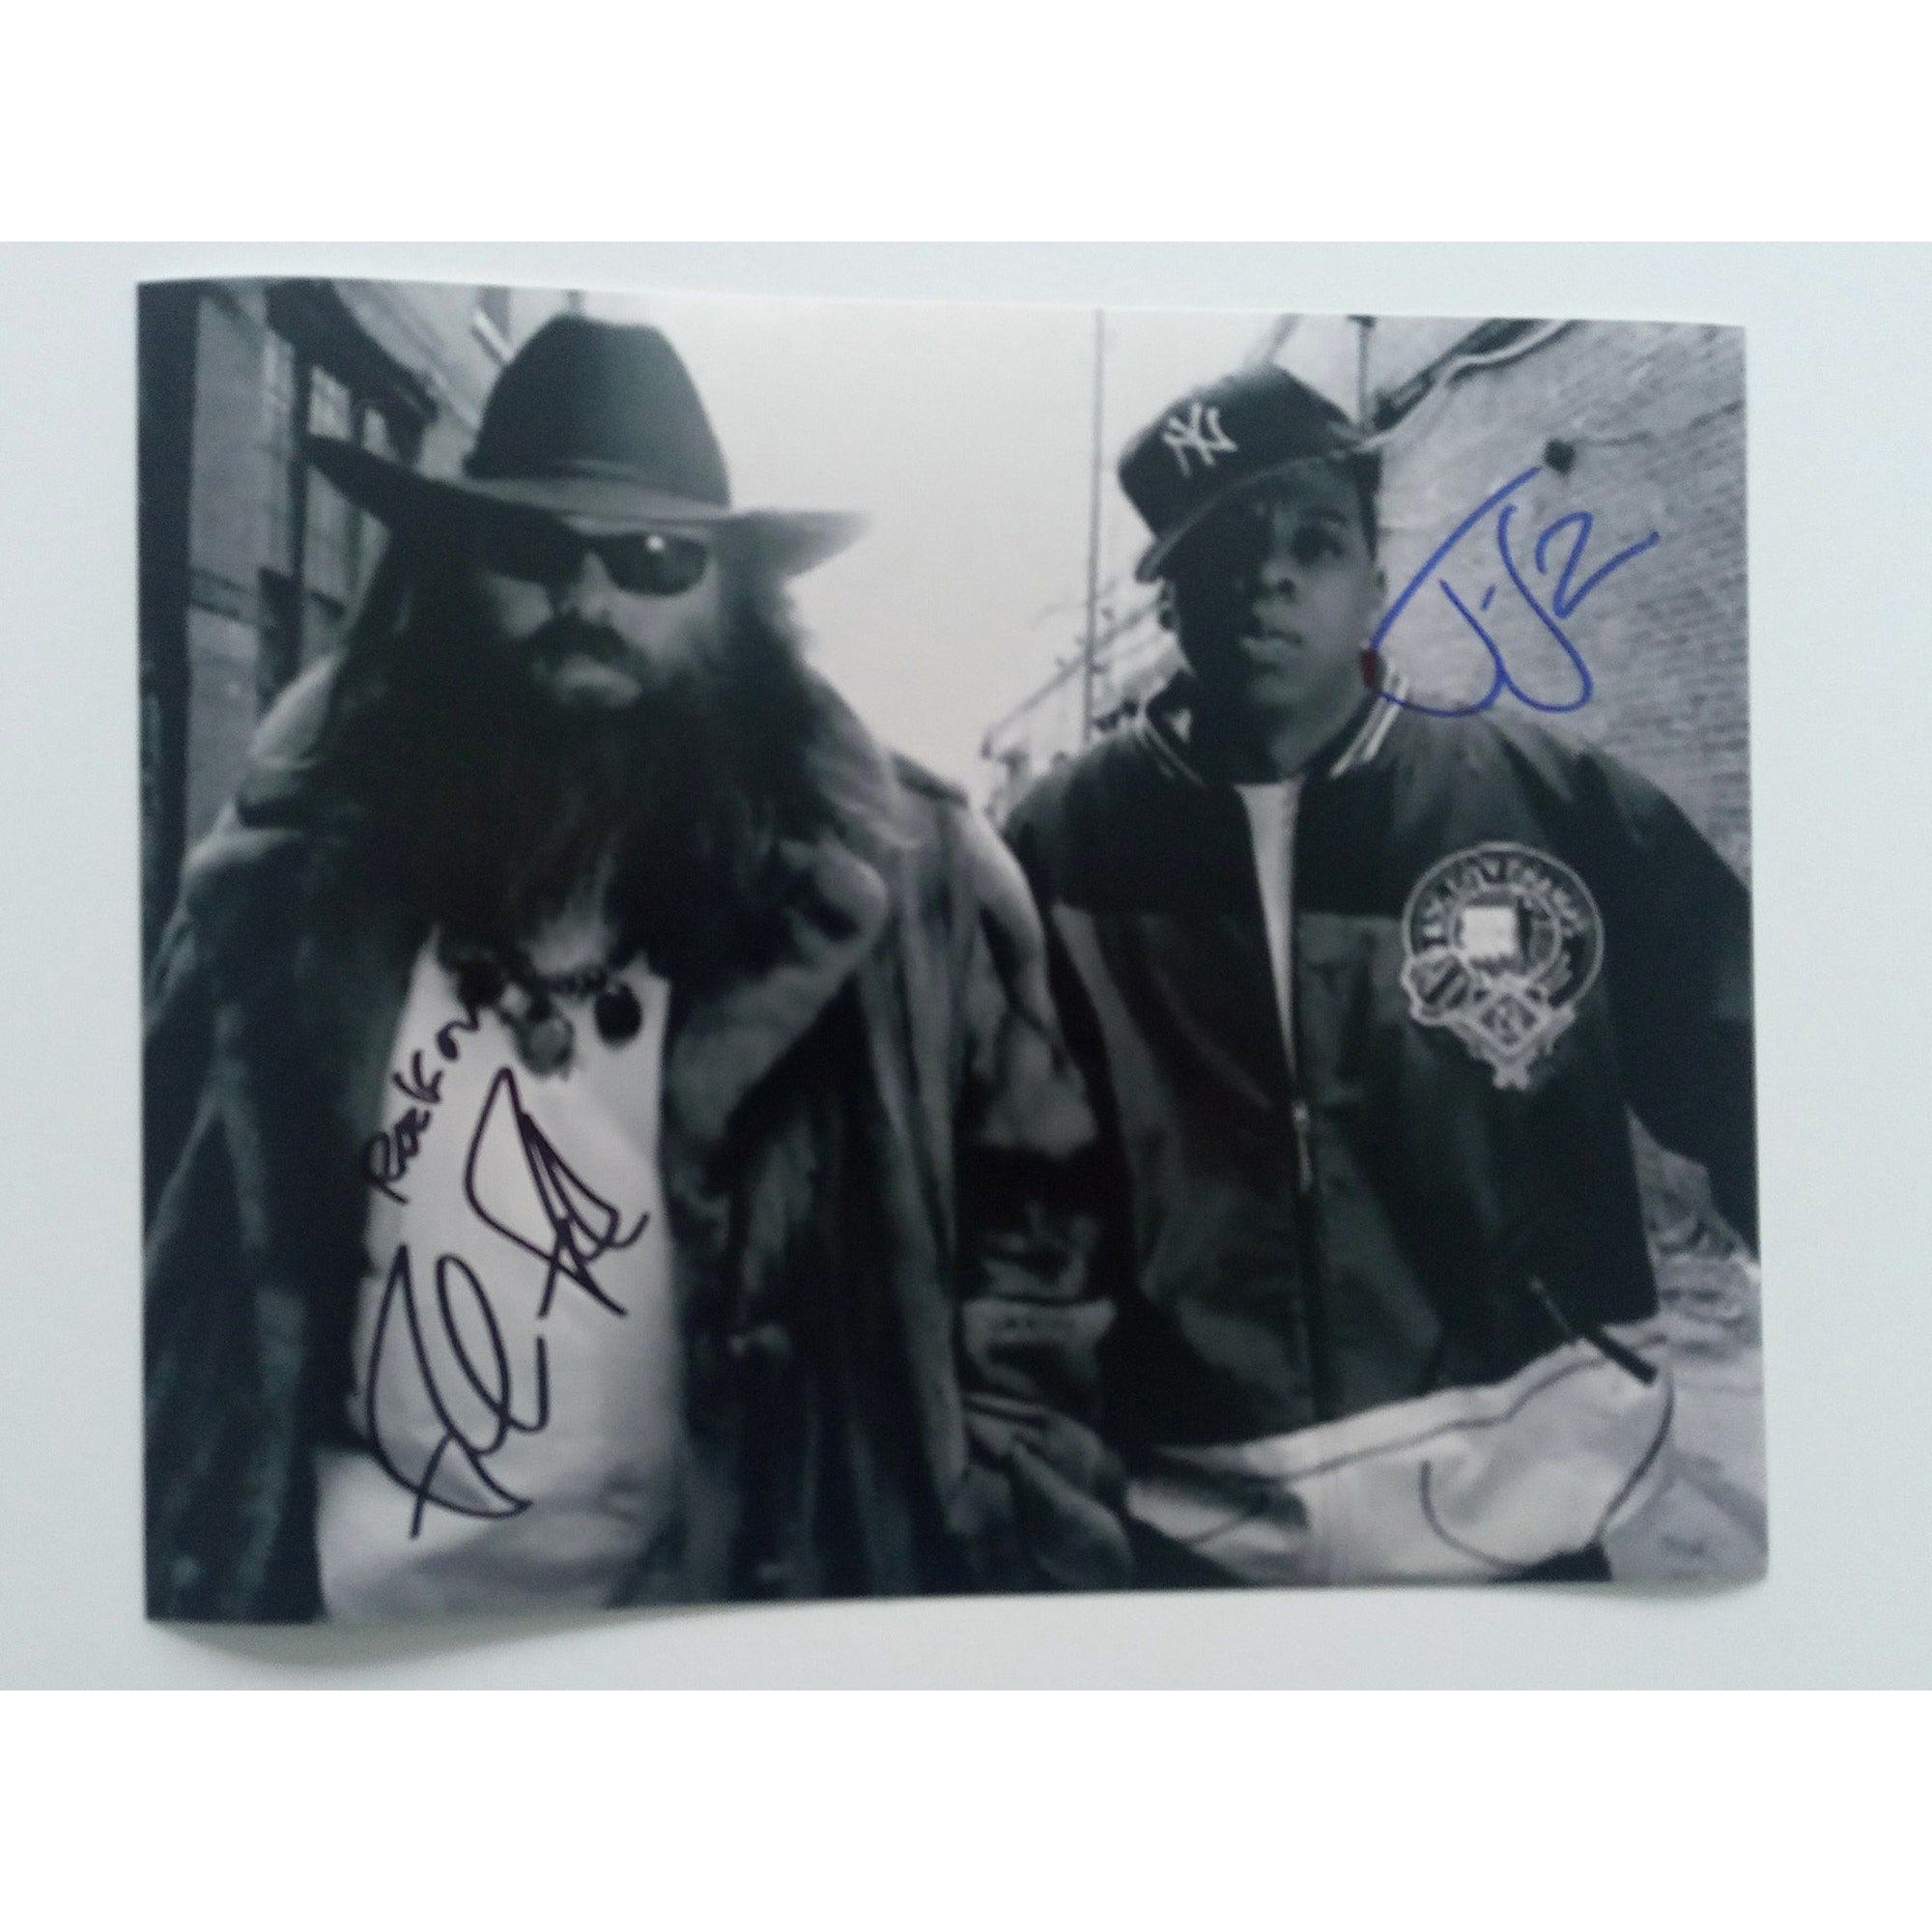 Rick Rubin and Jay-Z 8 by 10 signed photo with proof